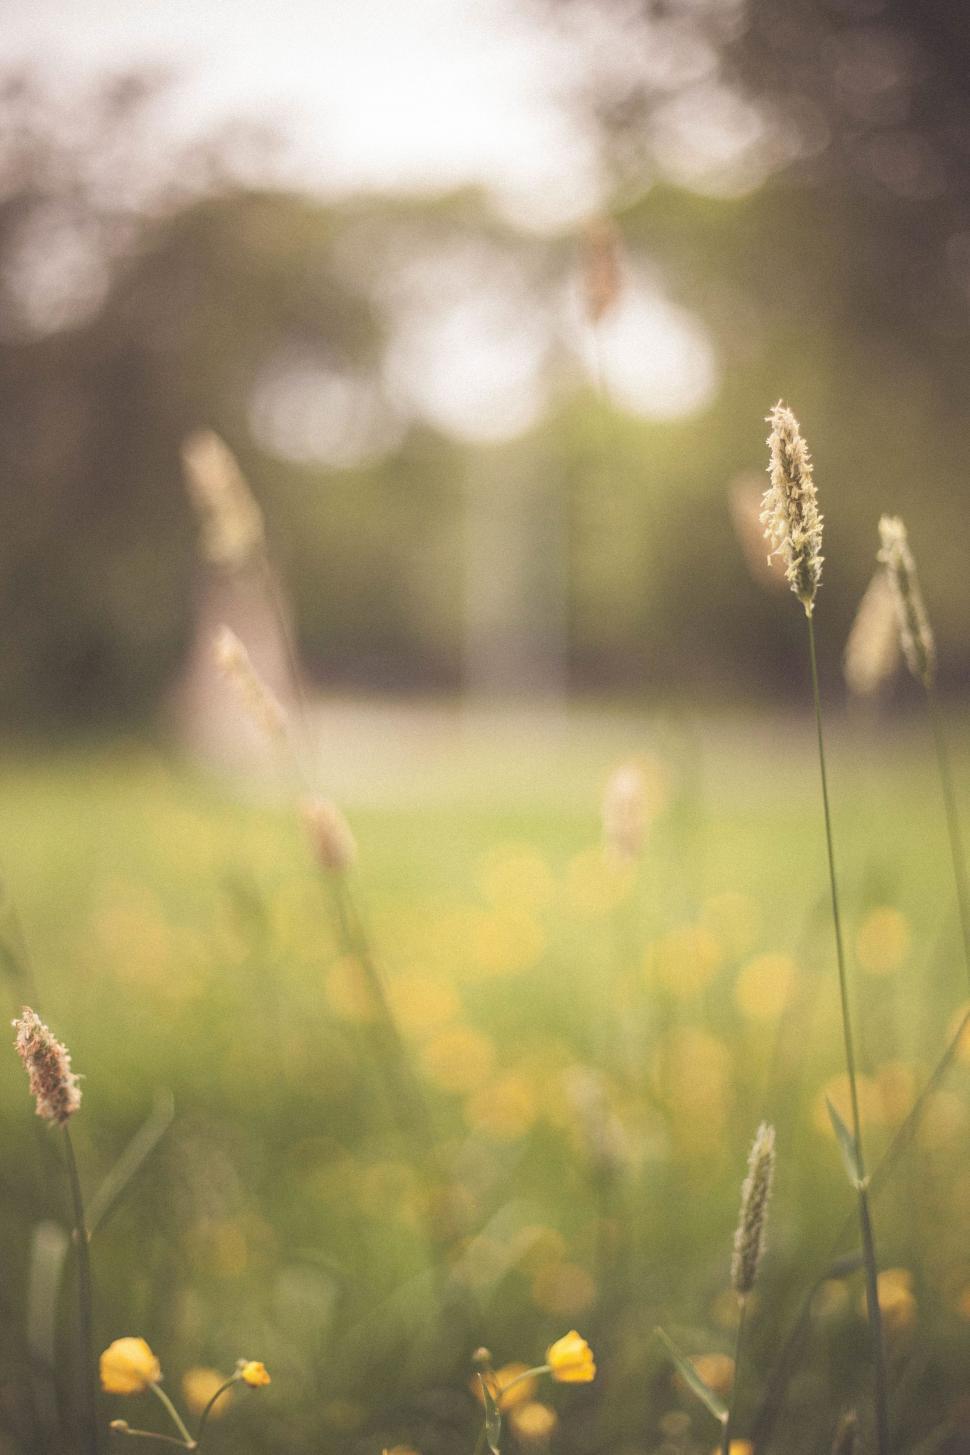 Free Image of Grassy Field With Yellow Flowers 